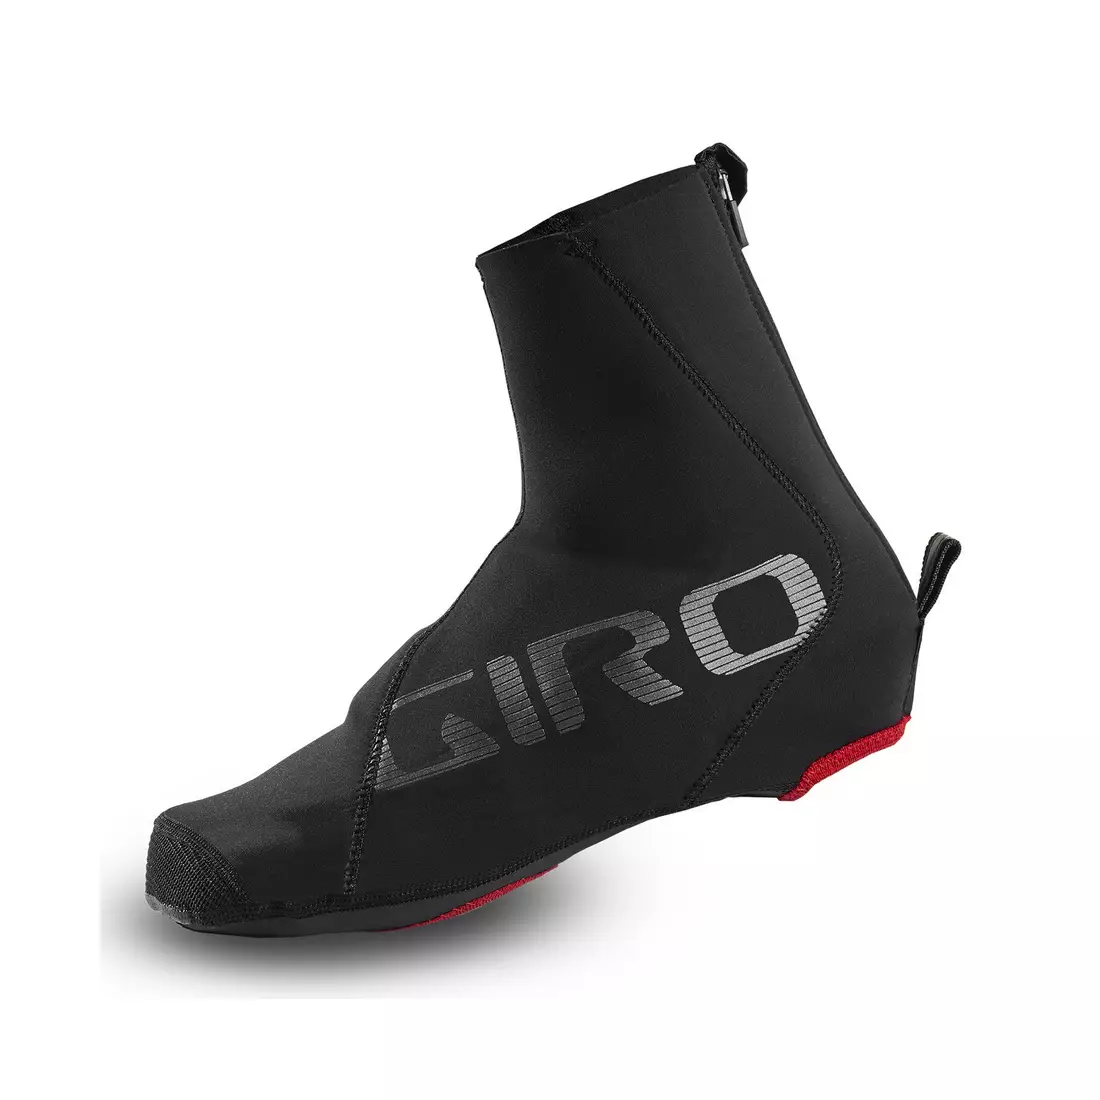 GIRO covers for bicycle shoes PROOF WINTER SHOE CVR black GR-7111989